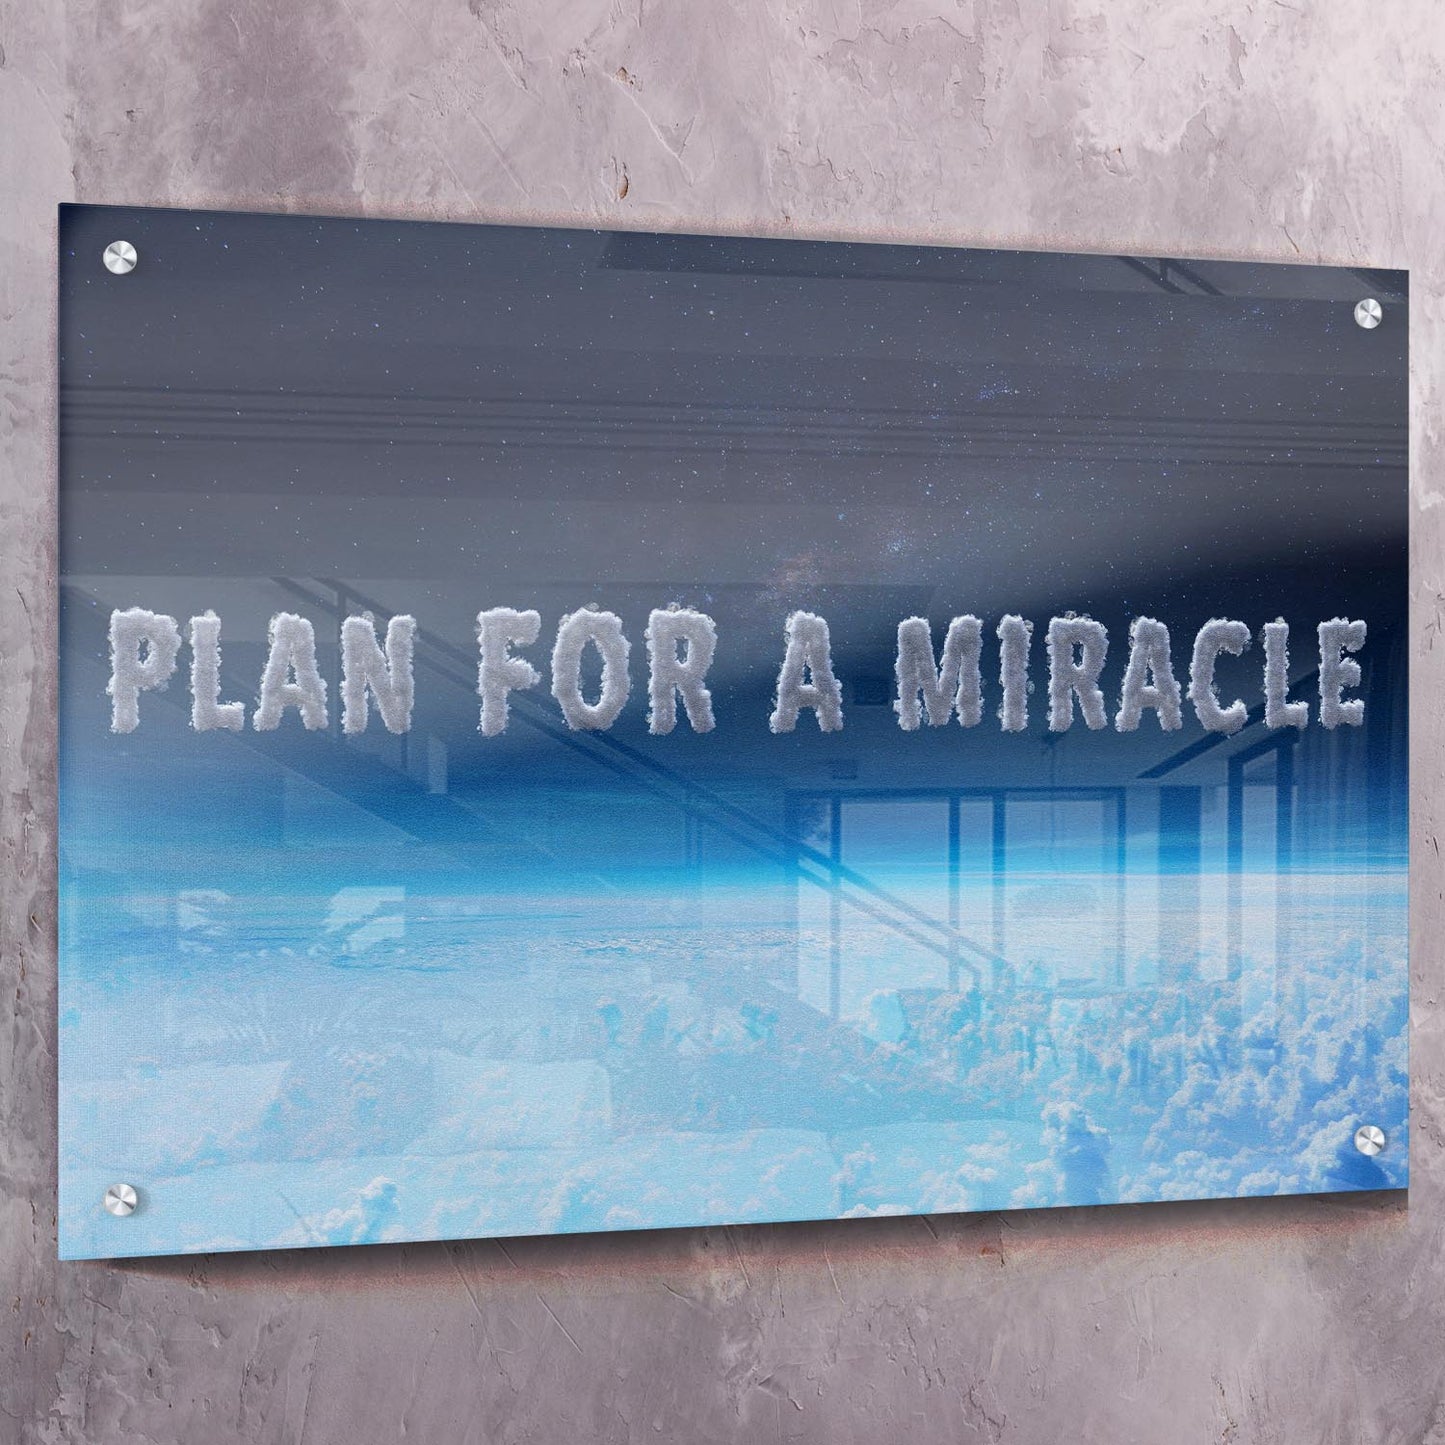 Plan For A Miracle Wall Art | Inspirational Wall Art Motivational Wall Art Quotes Office Art | ImpaktMaker Exclusive Canvas Art Landscape